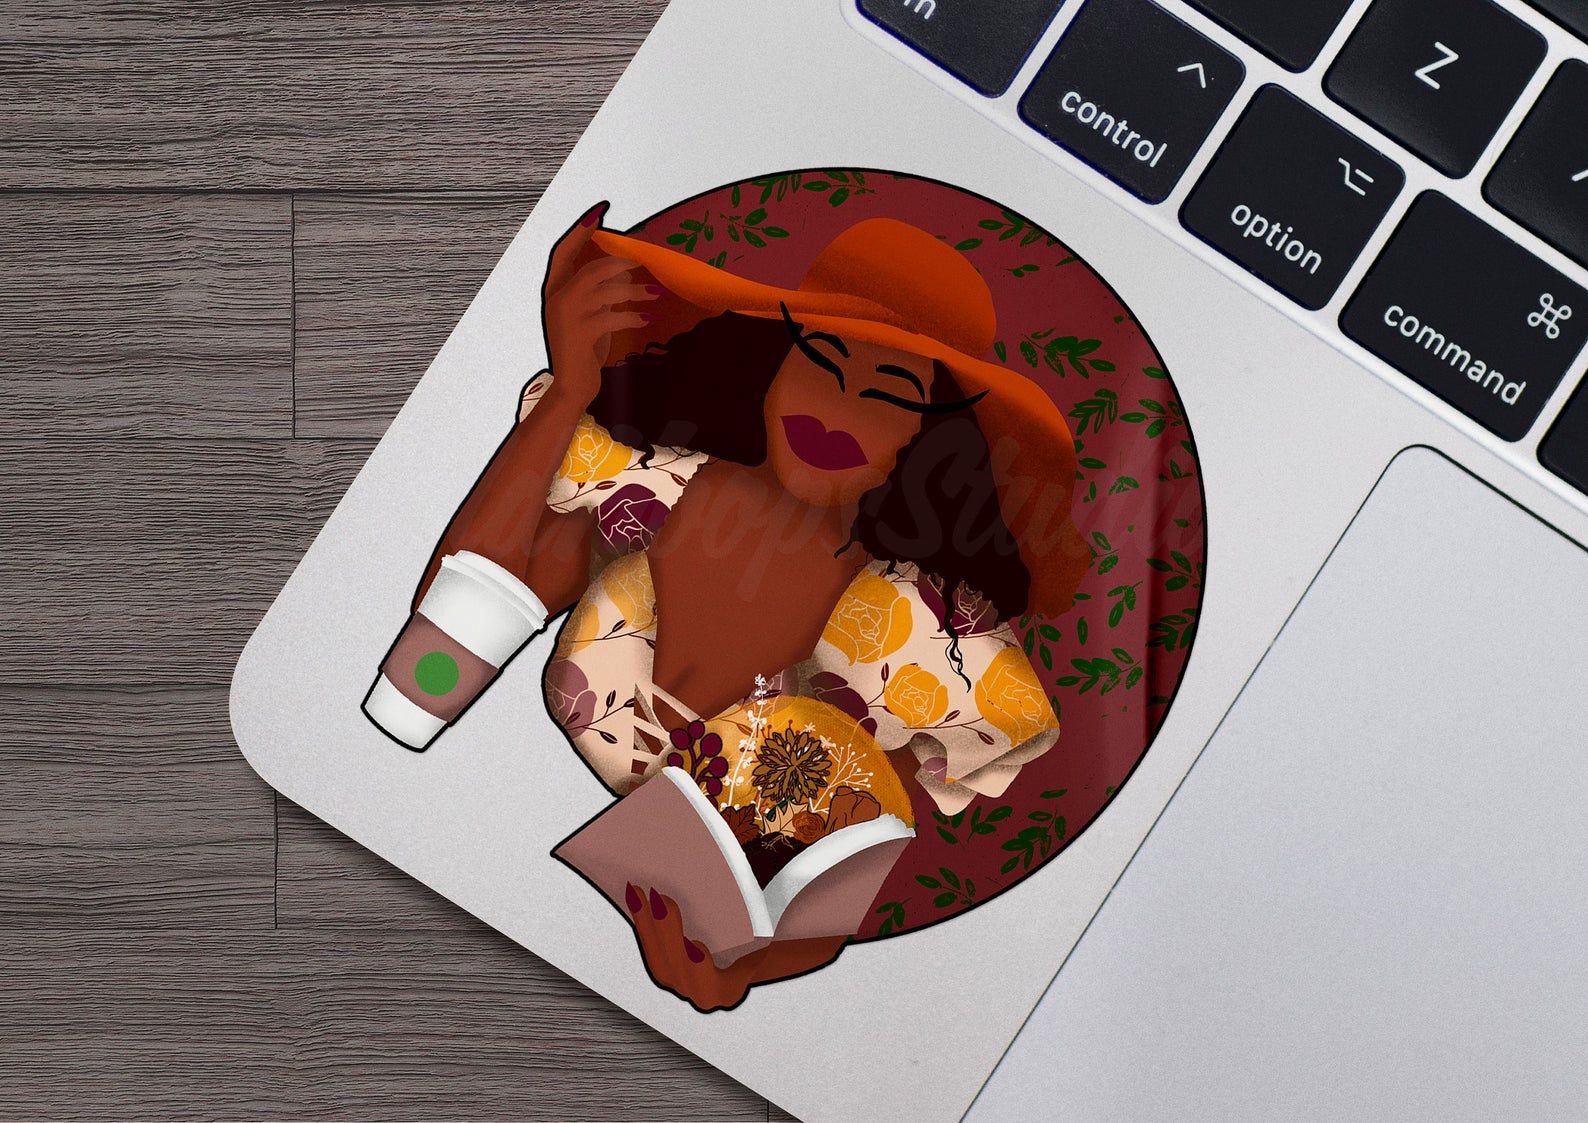 Image of a small sticker depicting a glamorous Black woman in a read hat and yellow floral dress, with a cup of coffee. She's holding a book that is open, and glowing light and fall florals seem to be bursting form the book.